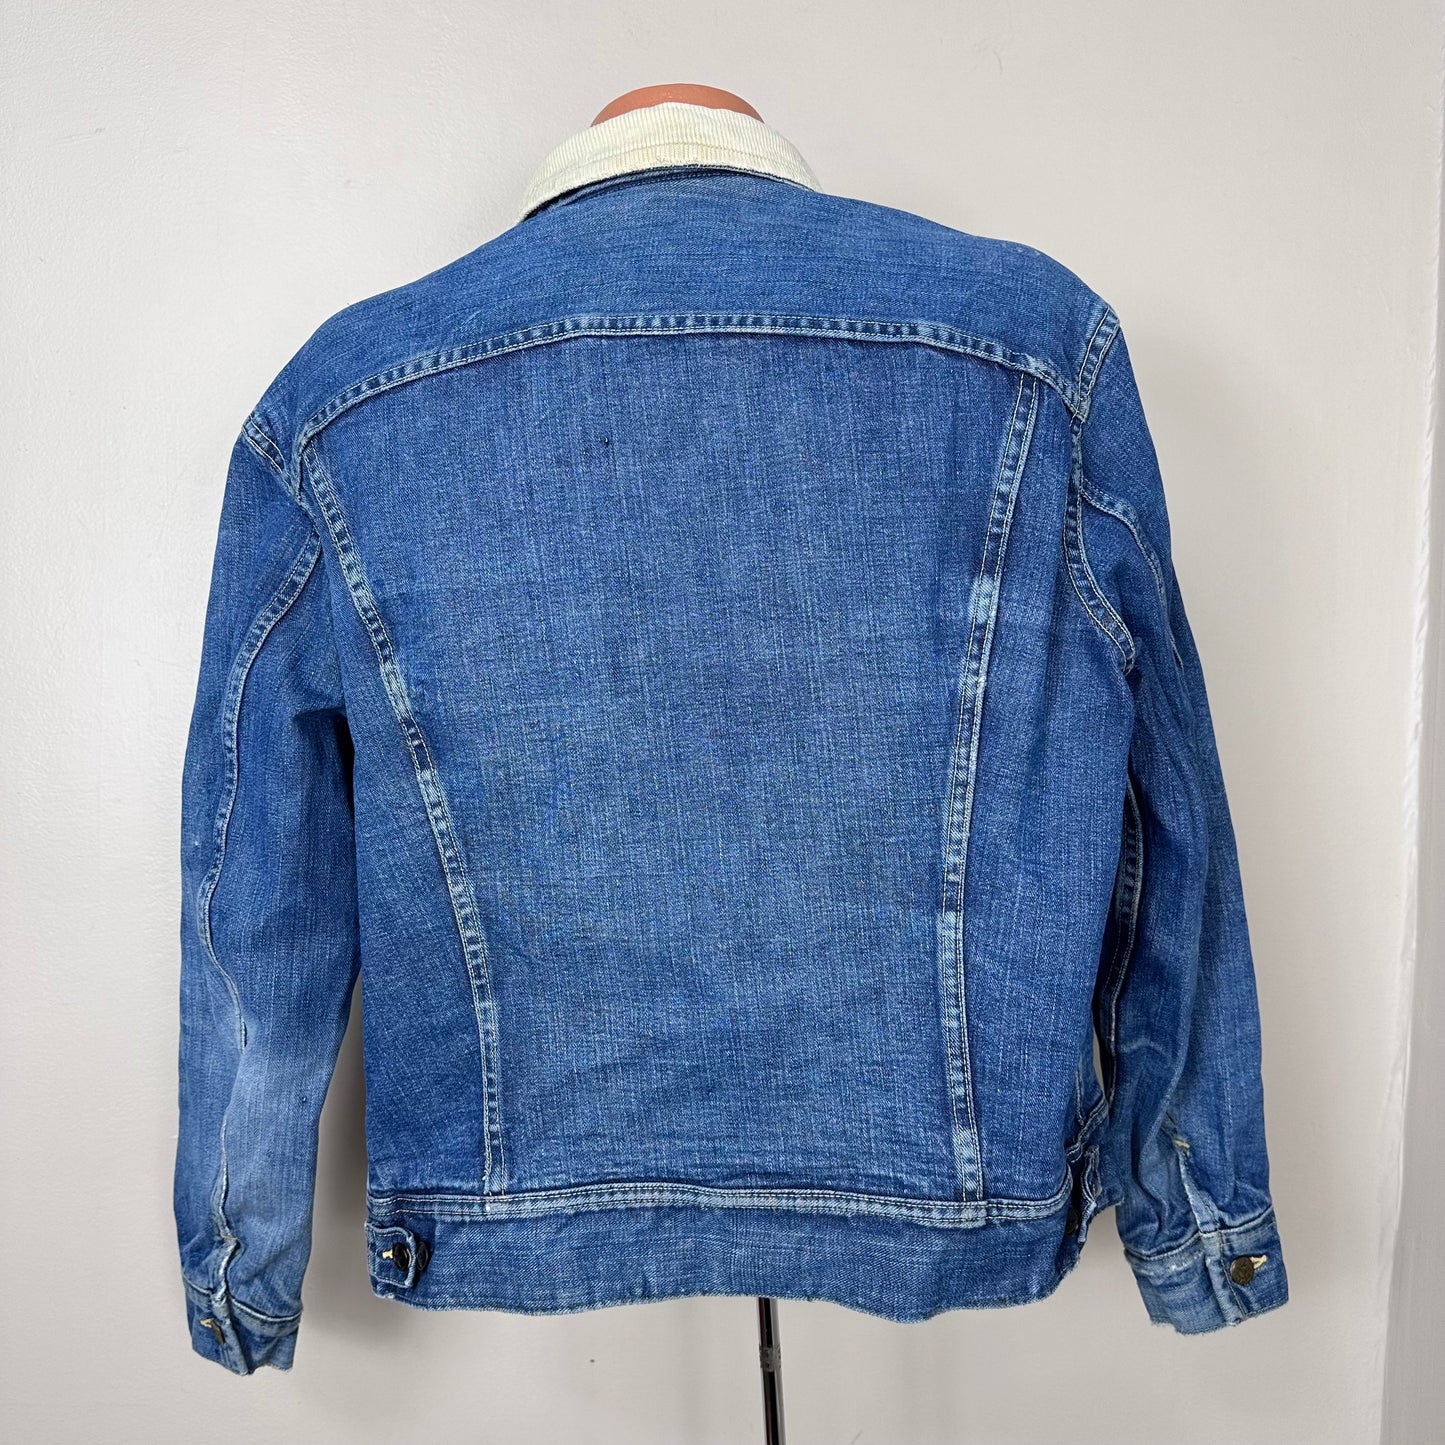 1960s Lee Storm Rider Denim Jacket with Corduroy Collar, Size Large, Lining Removed